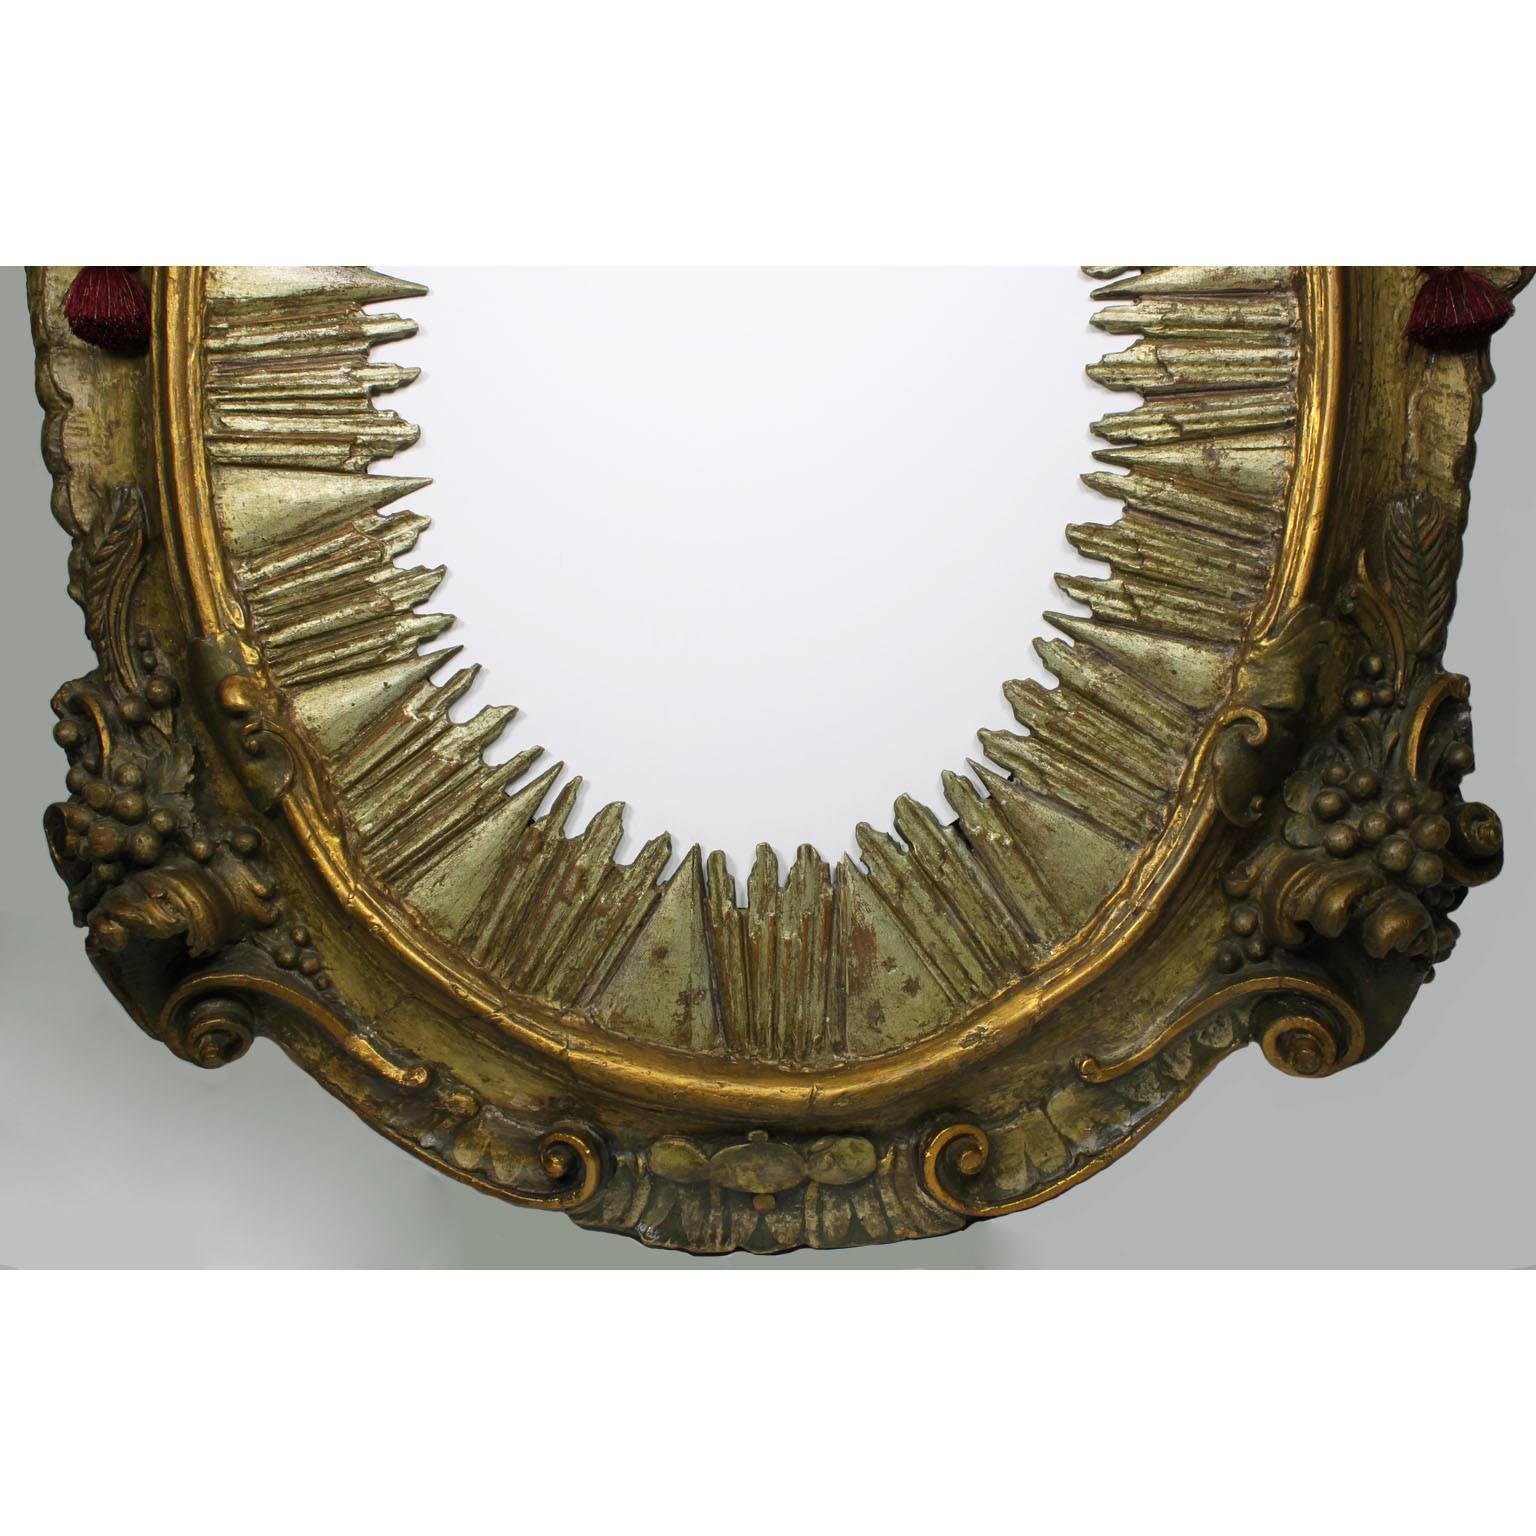  Italian Baroque 18th Century Parcel-Gilt Silver Carved Wood Mirror with Cherubs 1